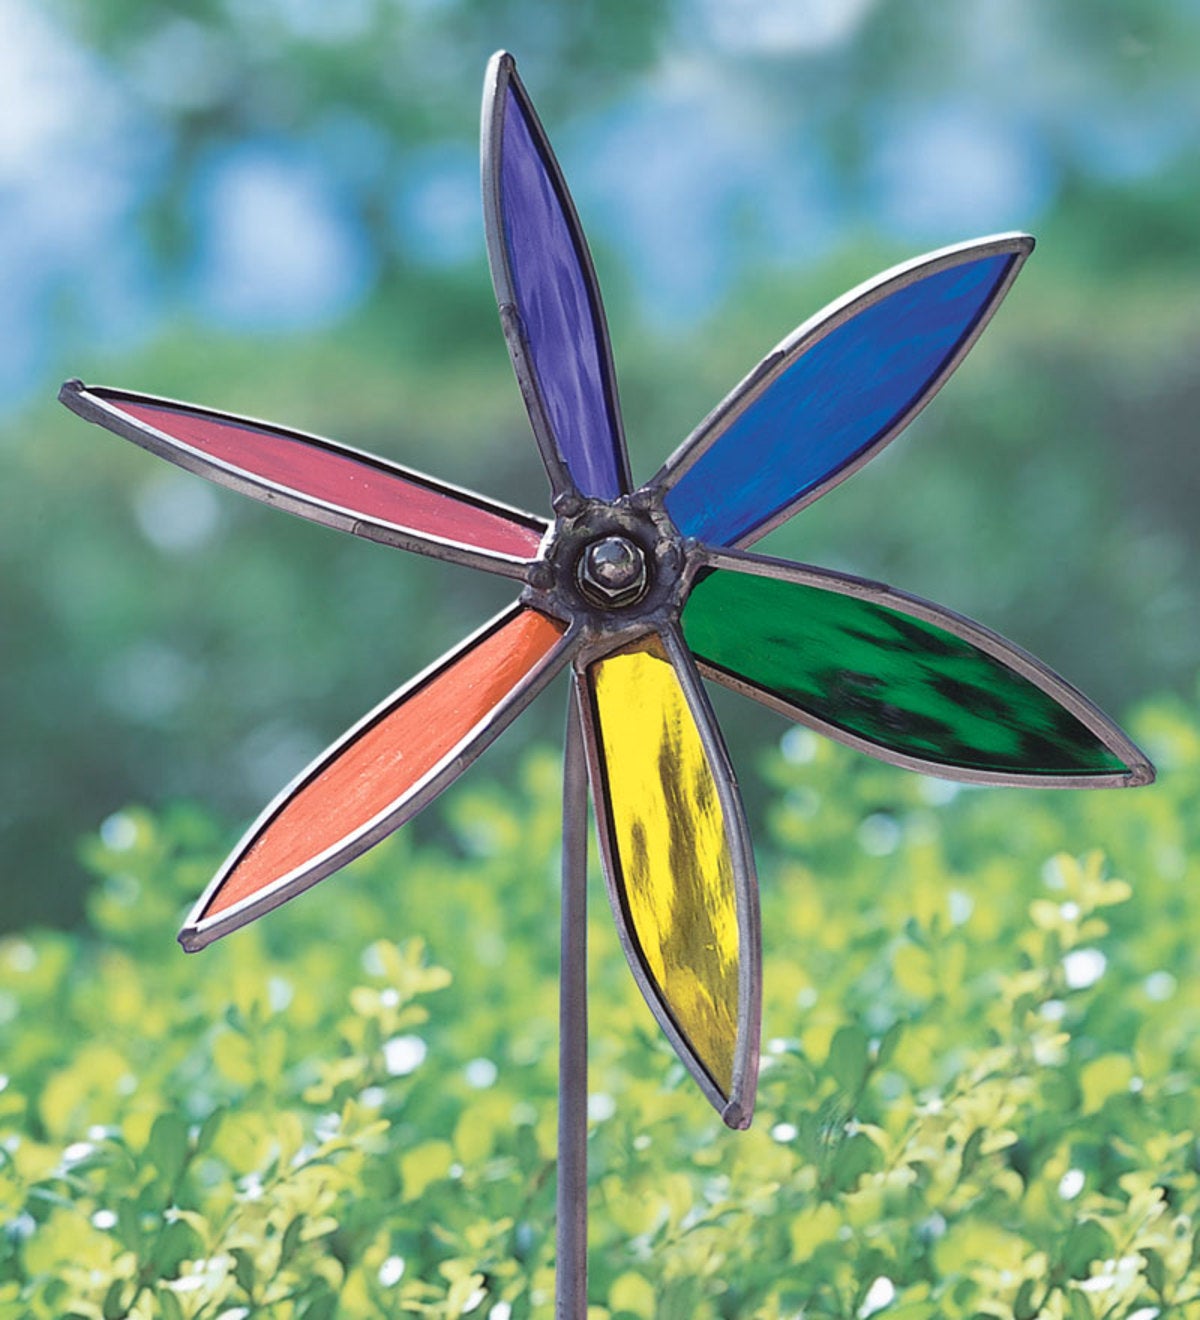 Stained Glass Pinwheel